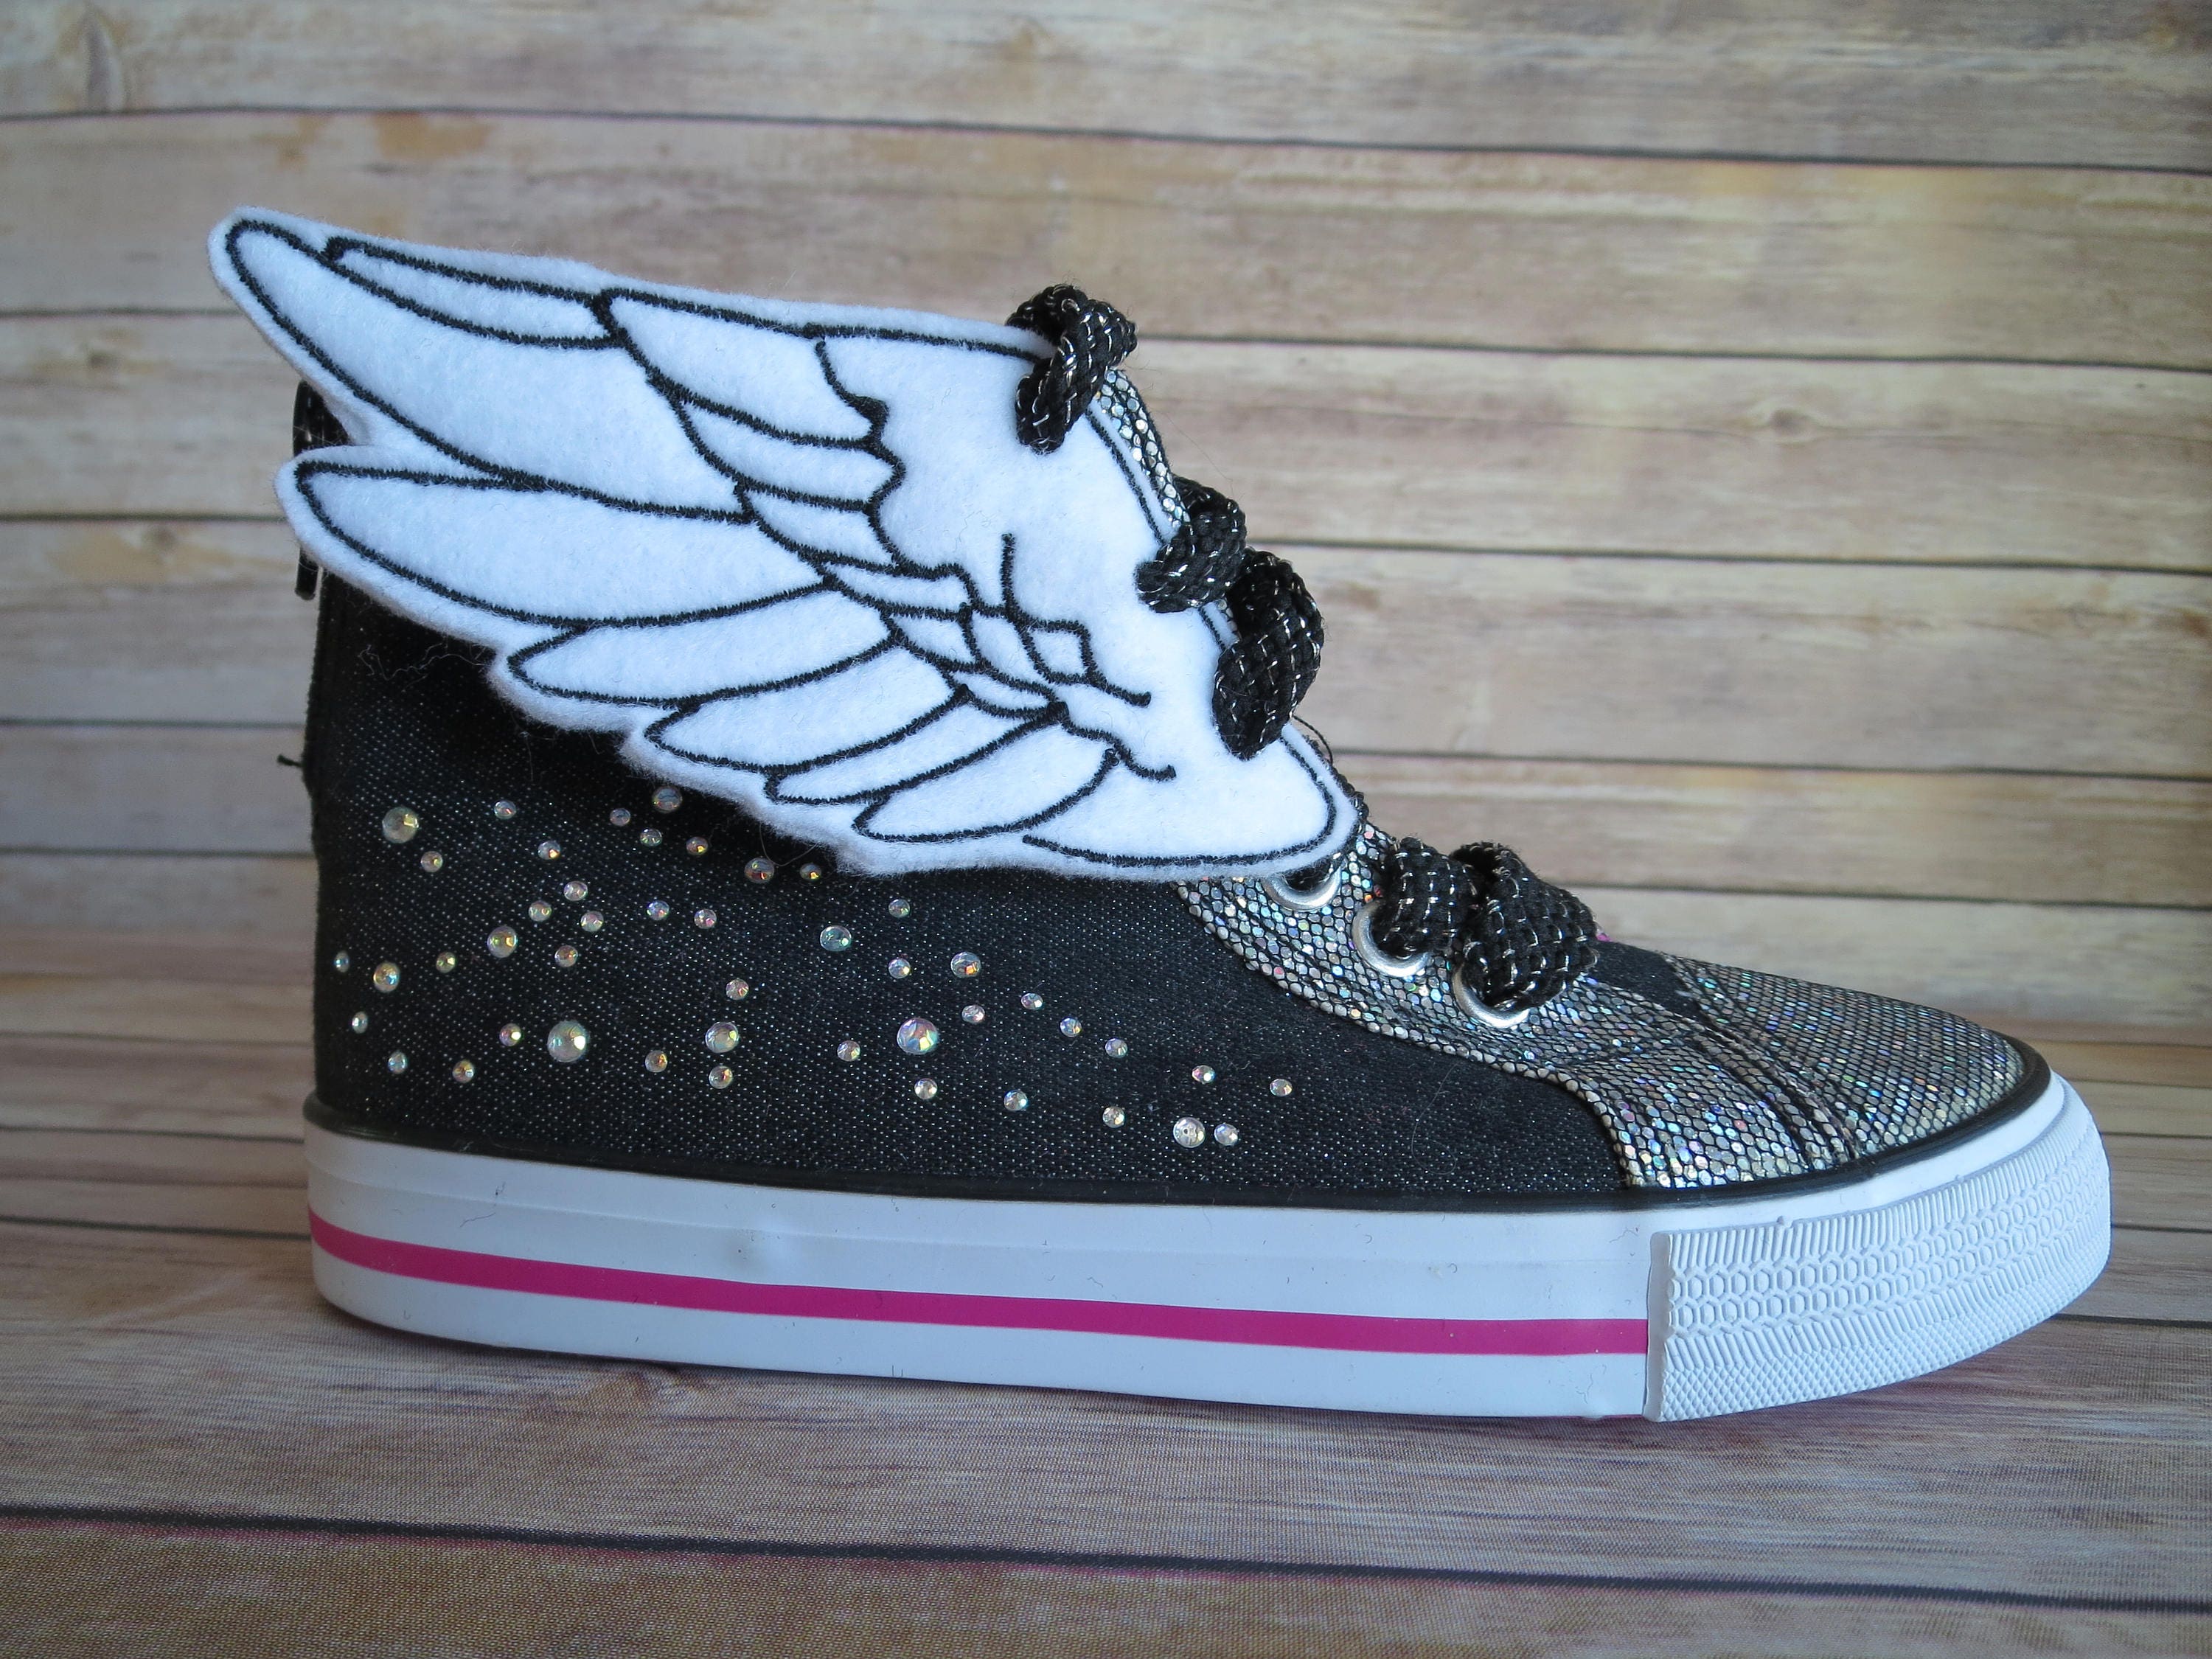 Percy Jackson Flying Shoes